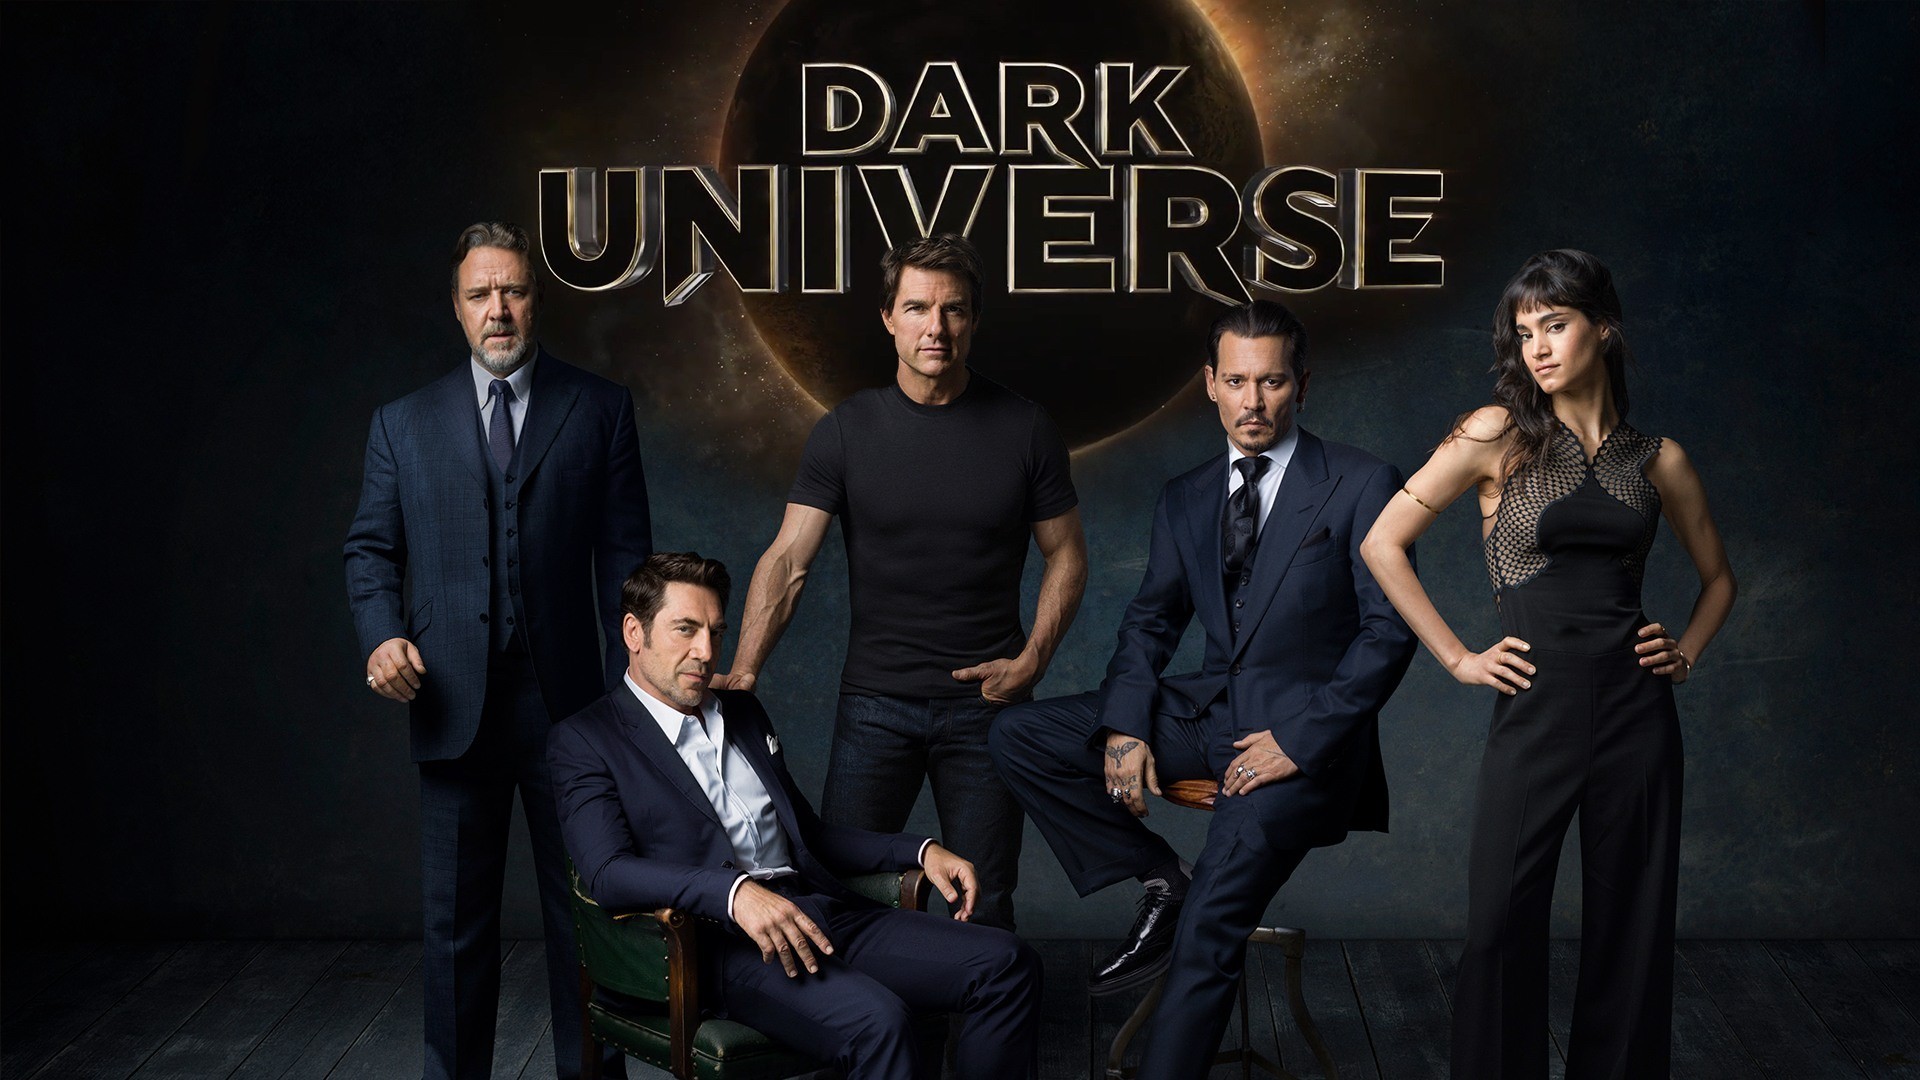 Dark Universe announced as Universal Monsters shared universe: Depp,  Bardem, Condon and Elfman confirmed – Movies